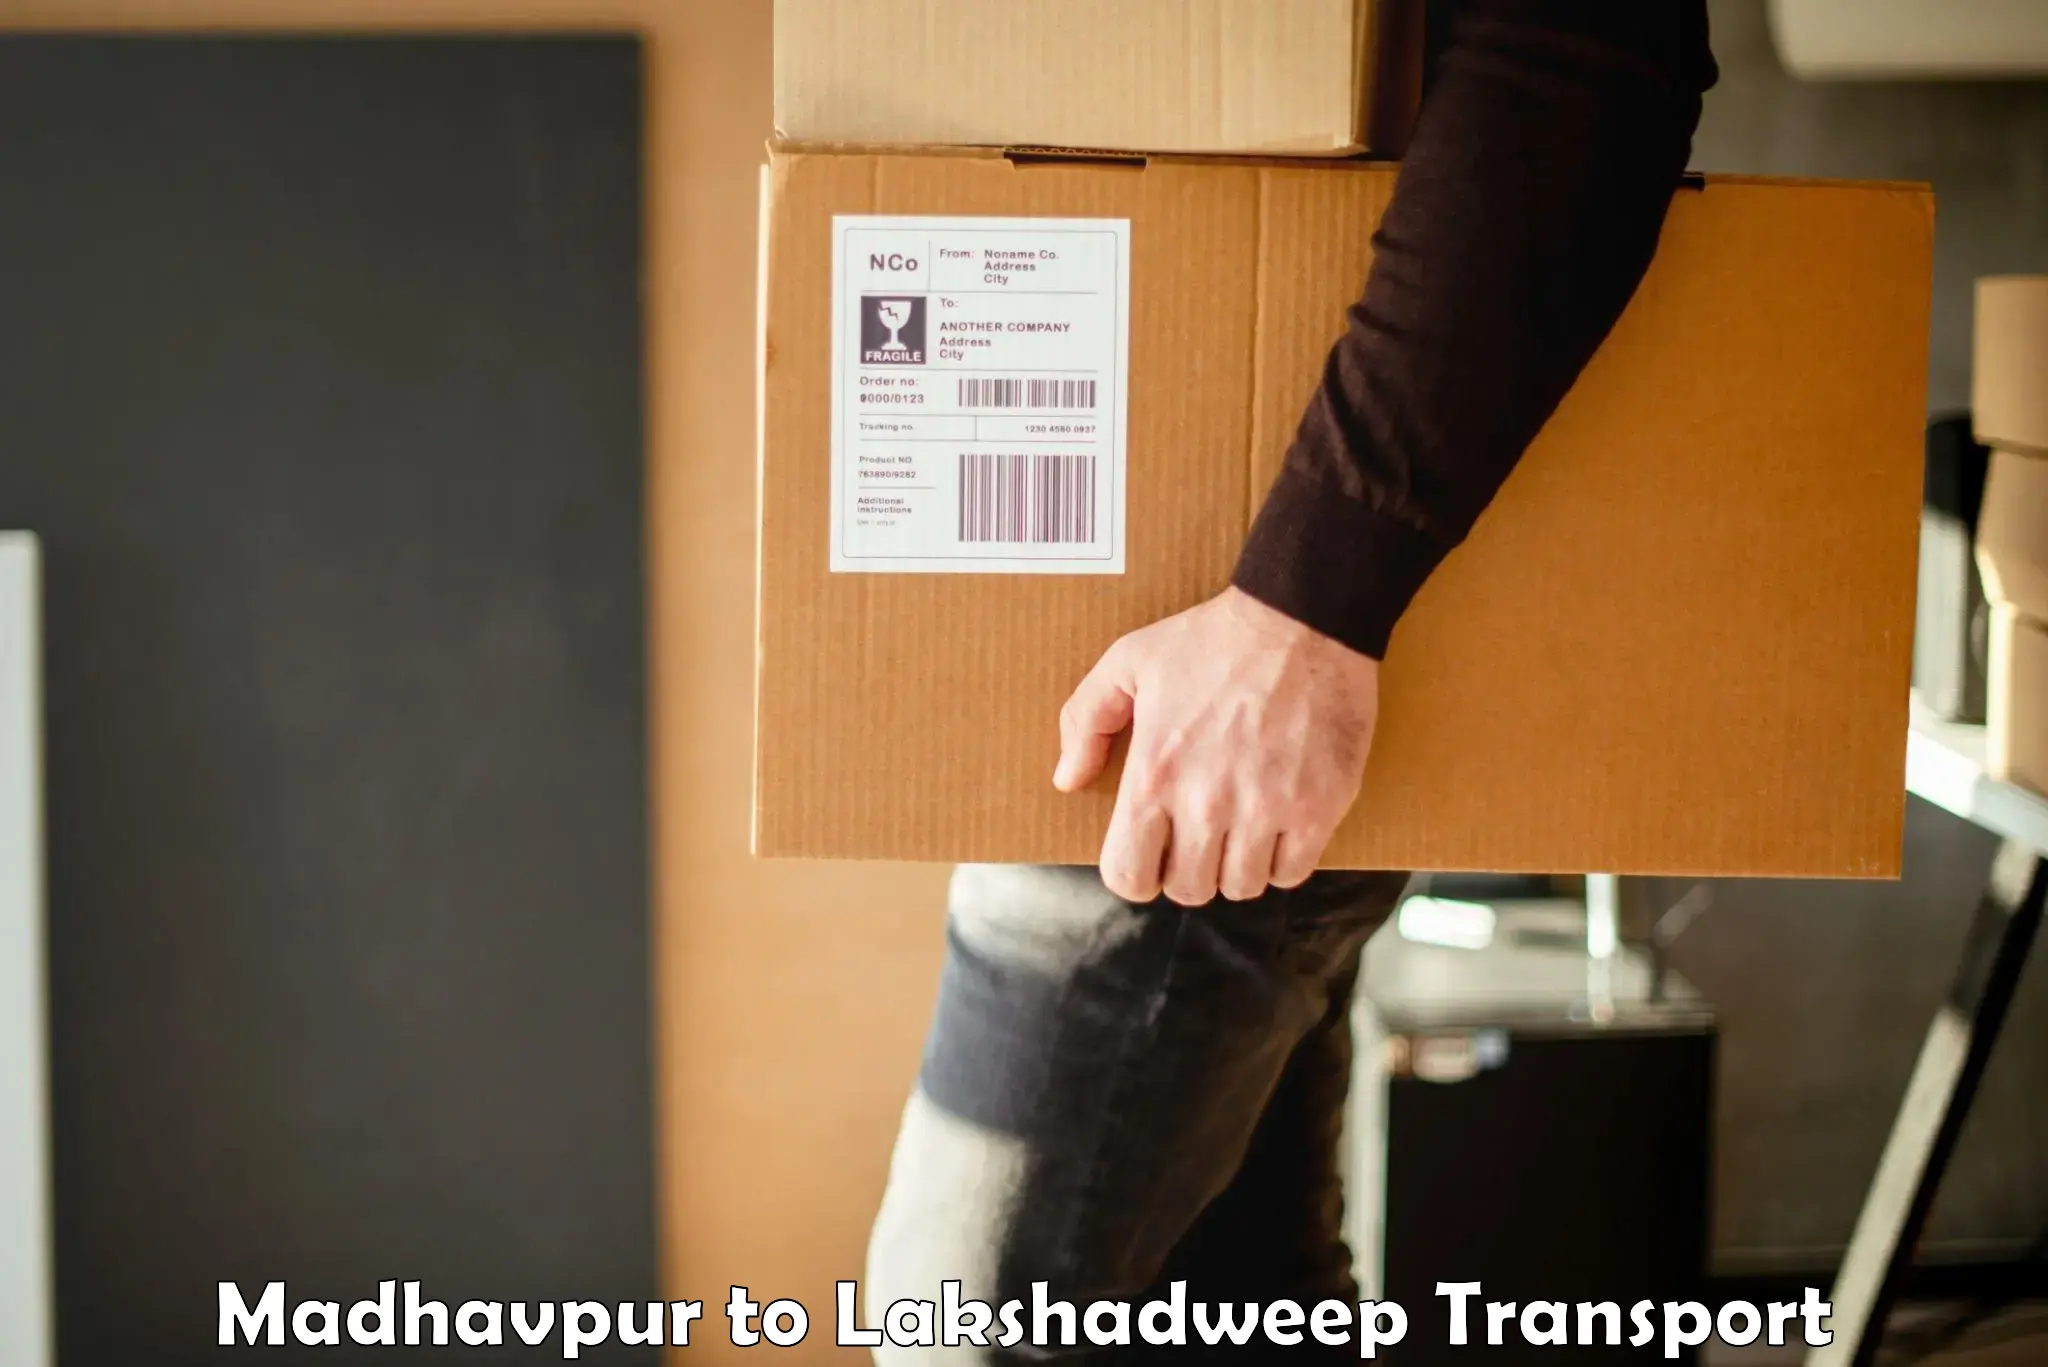 Commercial transport service Madhavpur to Lakshadweep